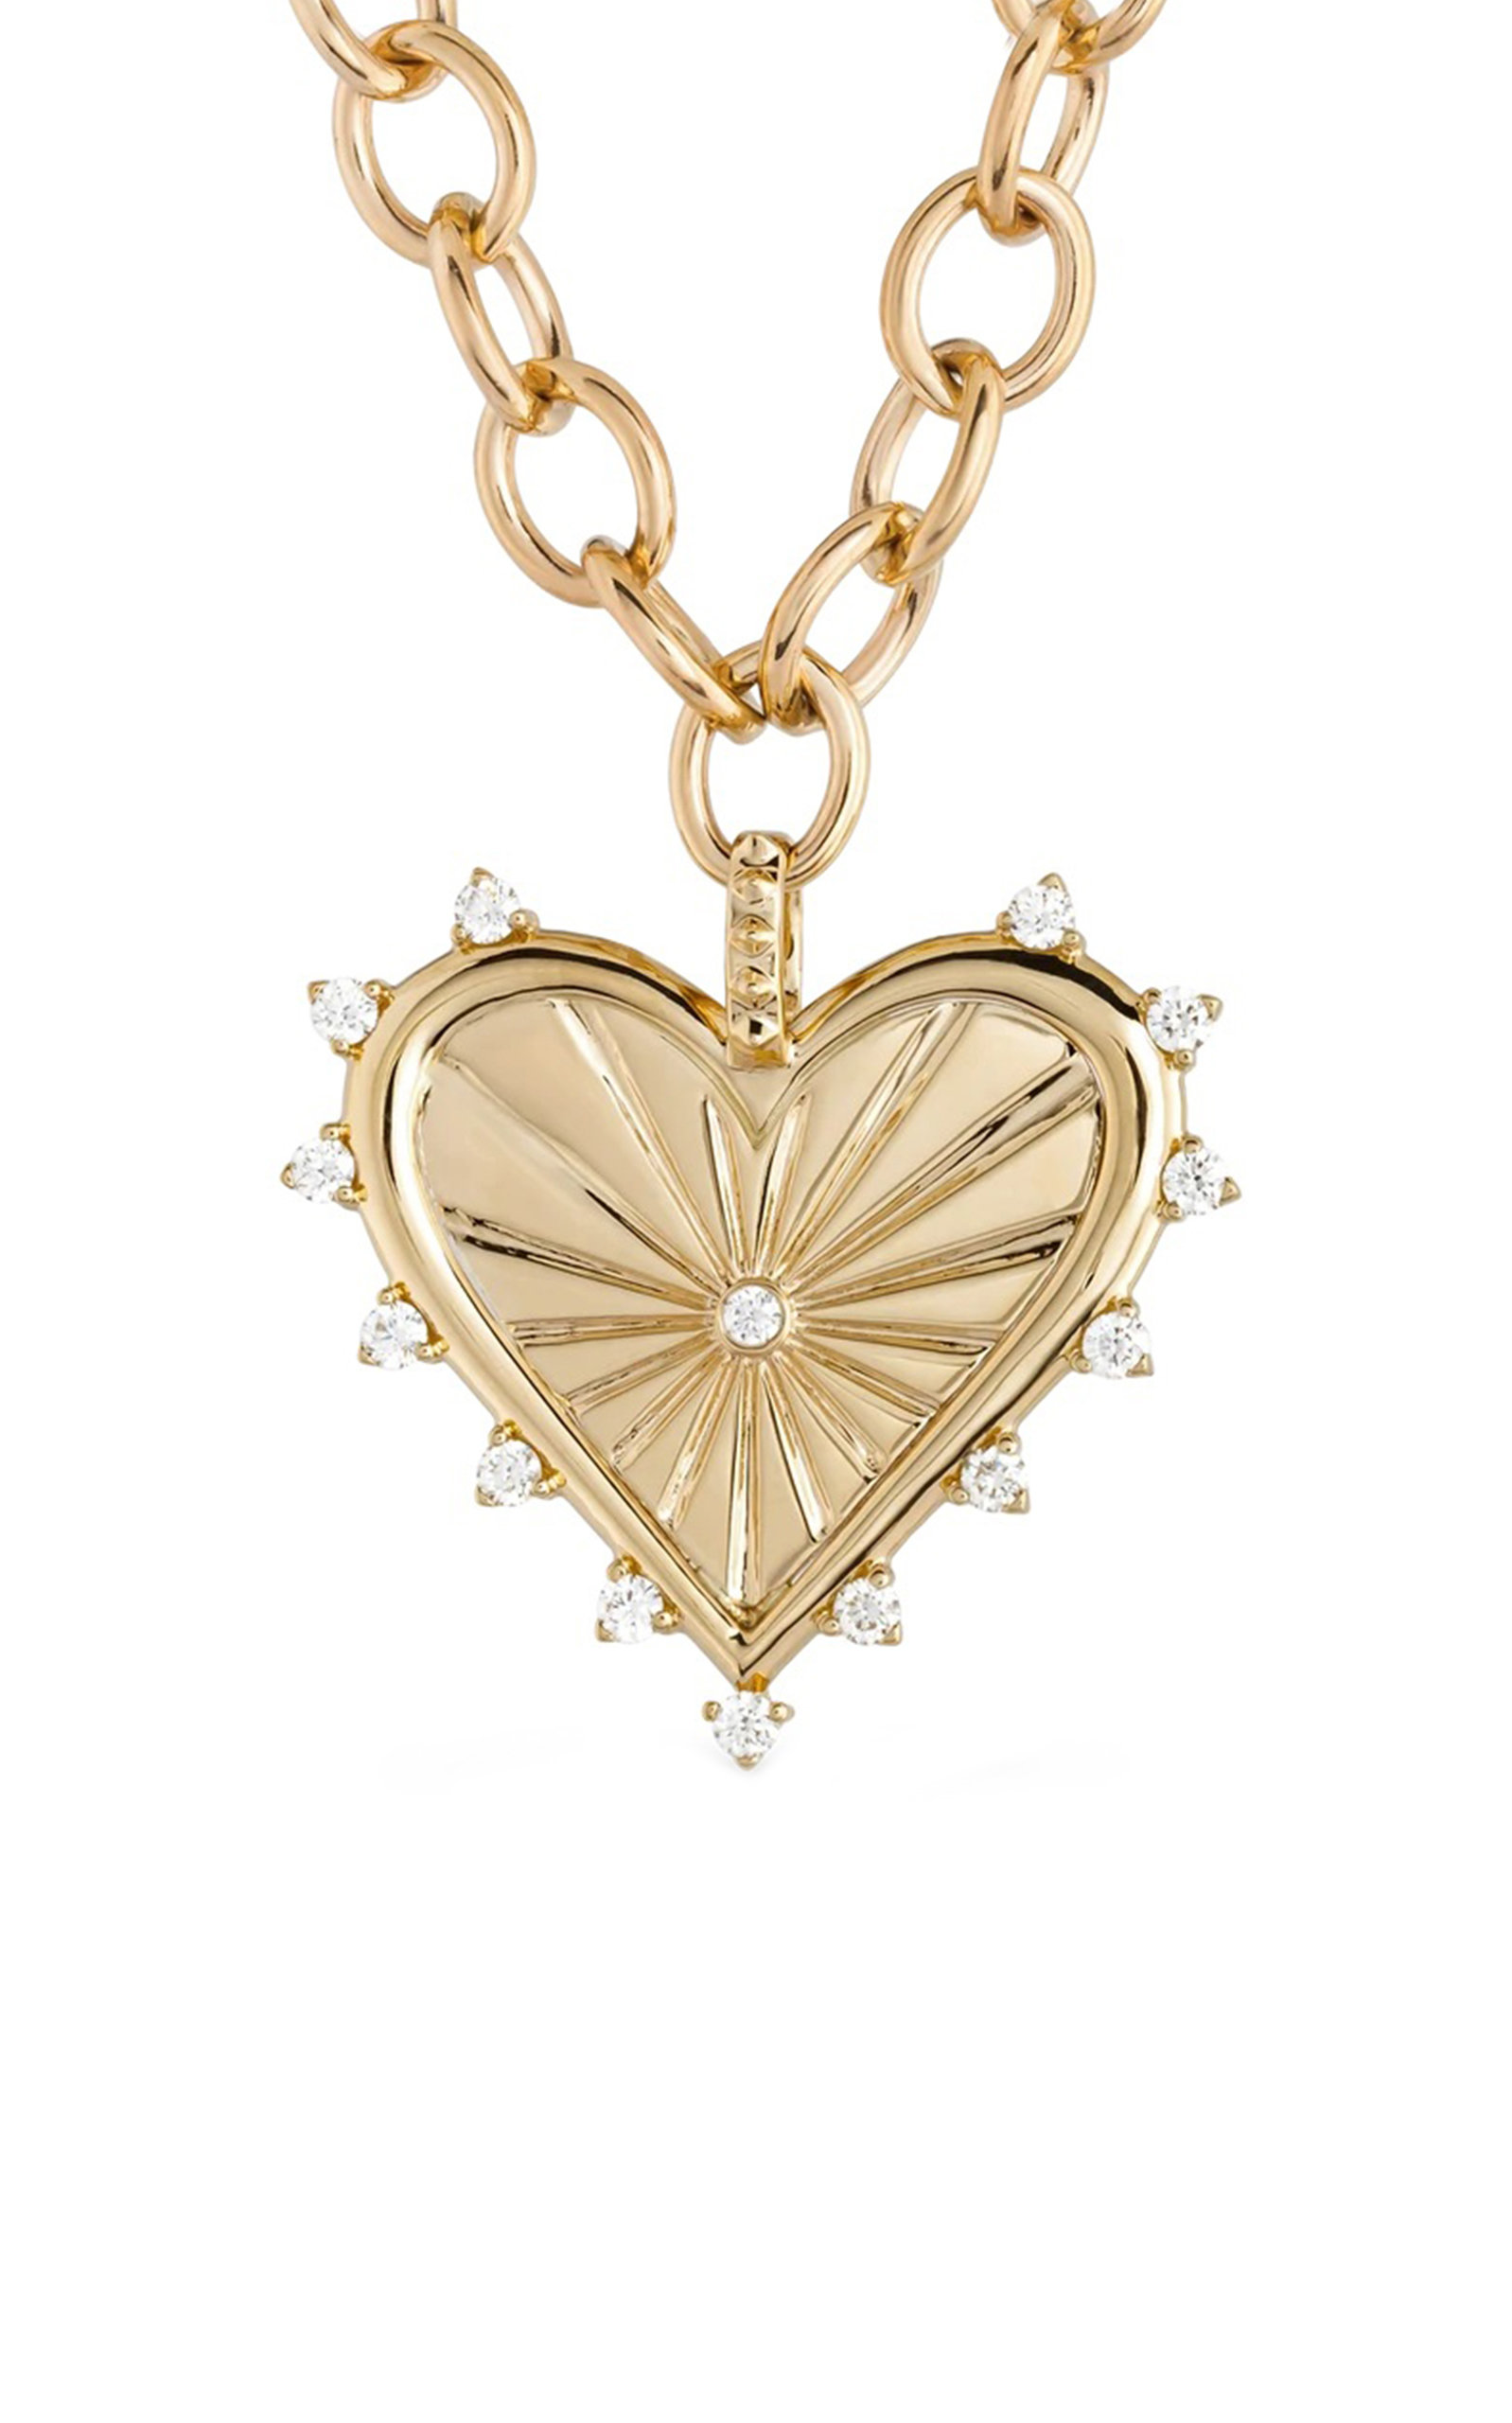 Marlo Laz Spiked Heart 14K Yellow Gold Diamond Coin Necklace